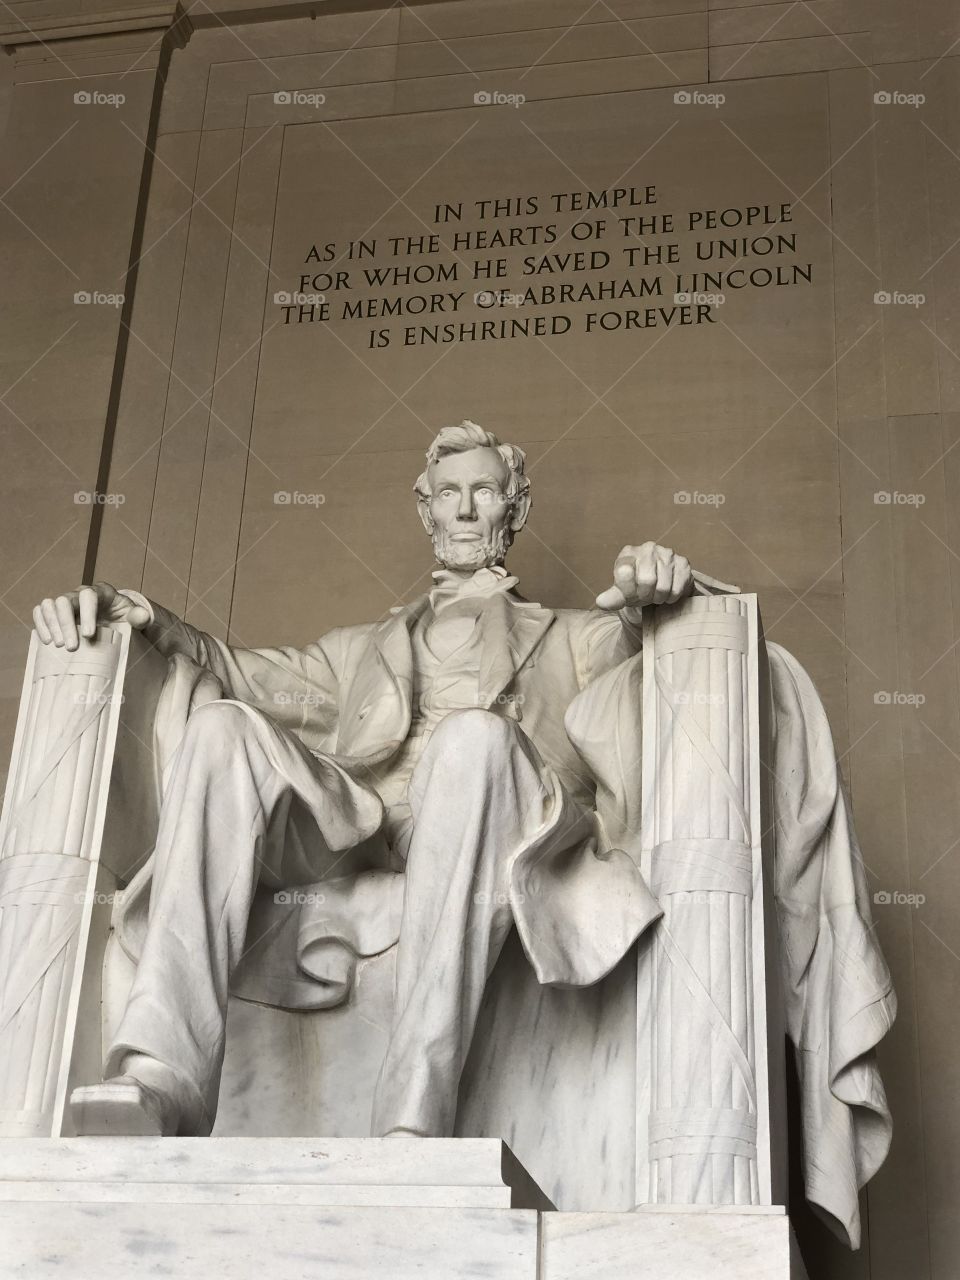 Statue of Abraham Lincoln with a quote above him in the Lincoln Memorial in Washington, D.C.